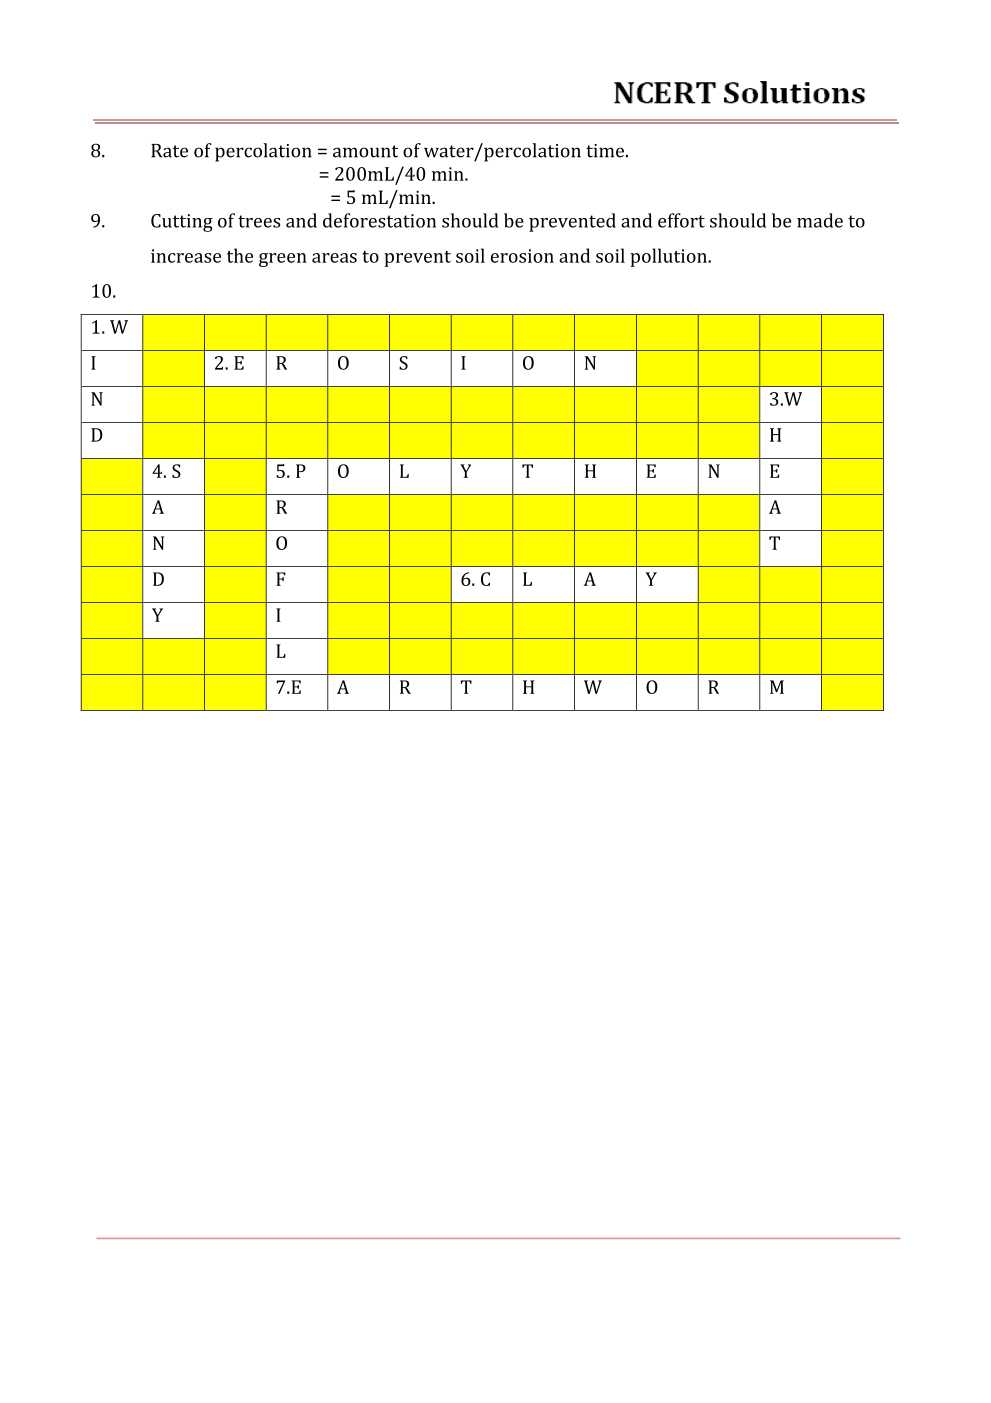 NCERT Solutions For Class 7 science Chapter 9 Soil